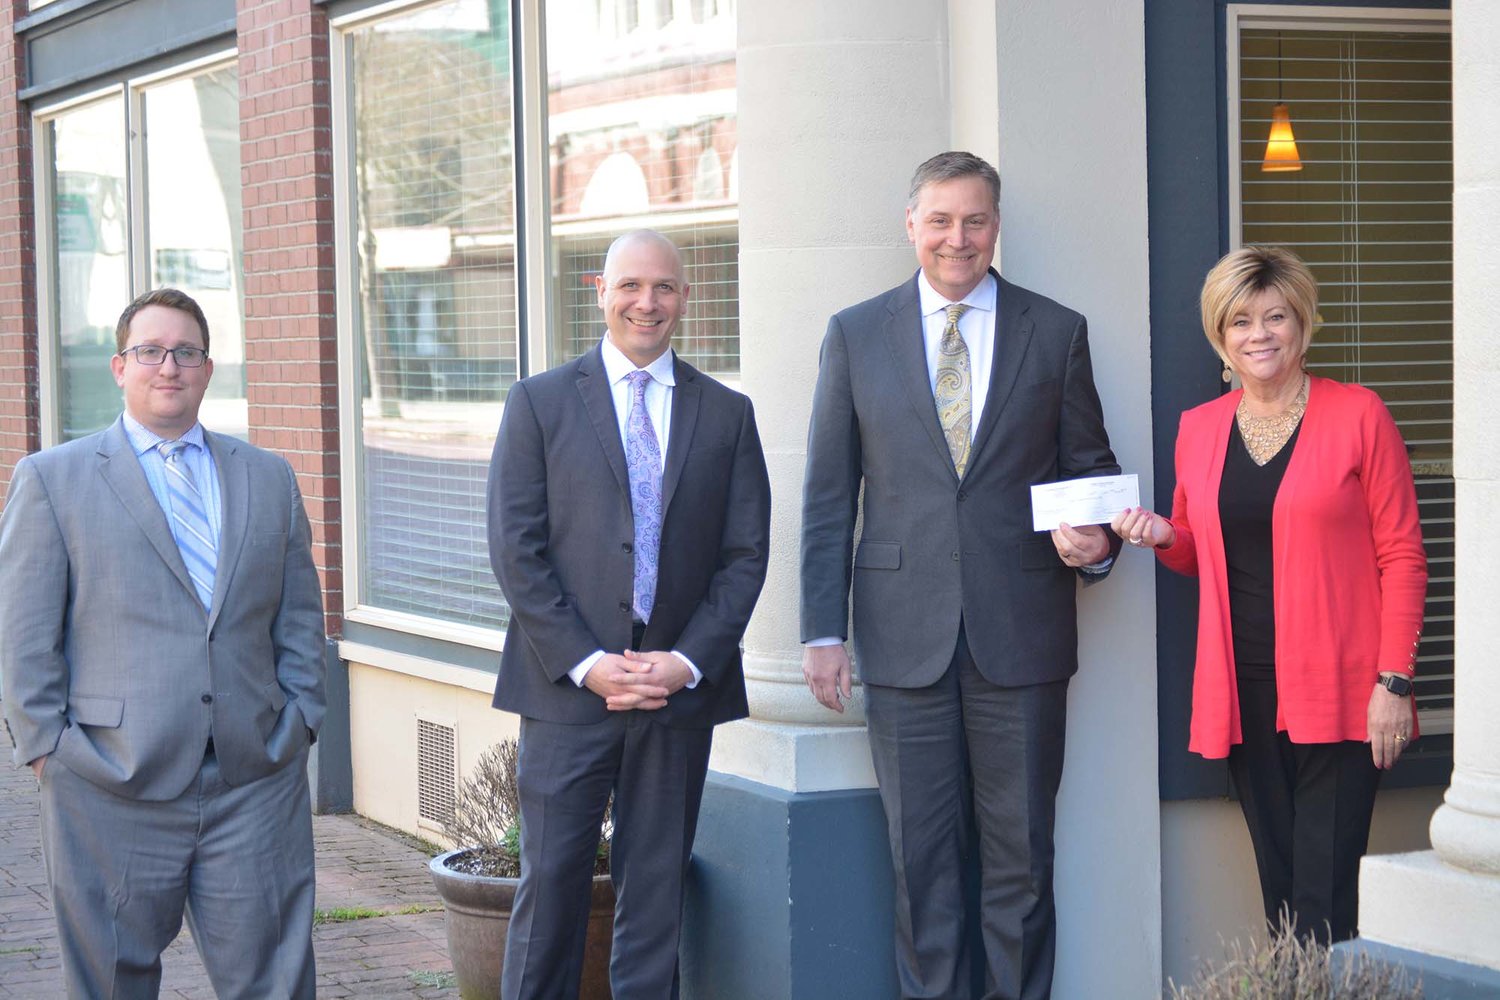 Althauser Rayan and Abbarno, LLP Partners Jakob McGhie, Peter Abbarno and Todd Rayan pose with United Way of Lewis County Executive Director Debbie Campbell and the $3,000 check dedicated to United Way’s COVID-19 Response Fund